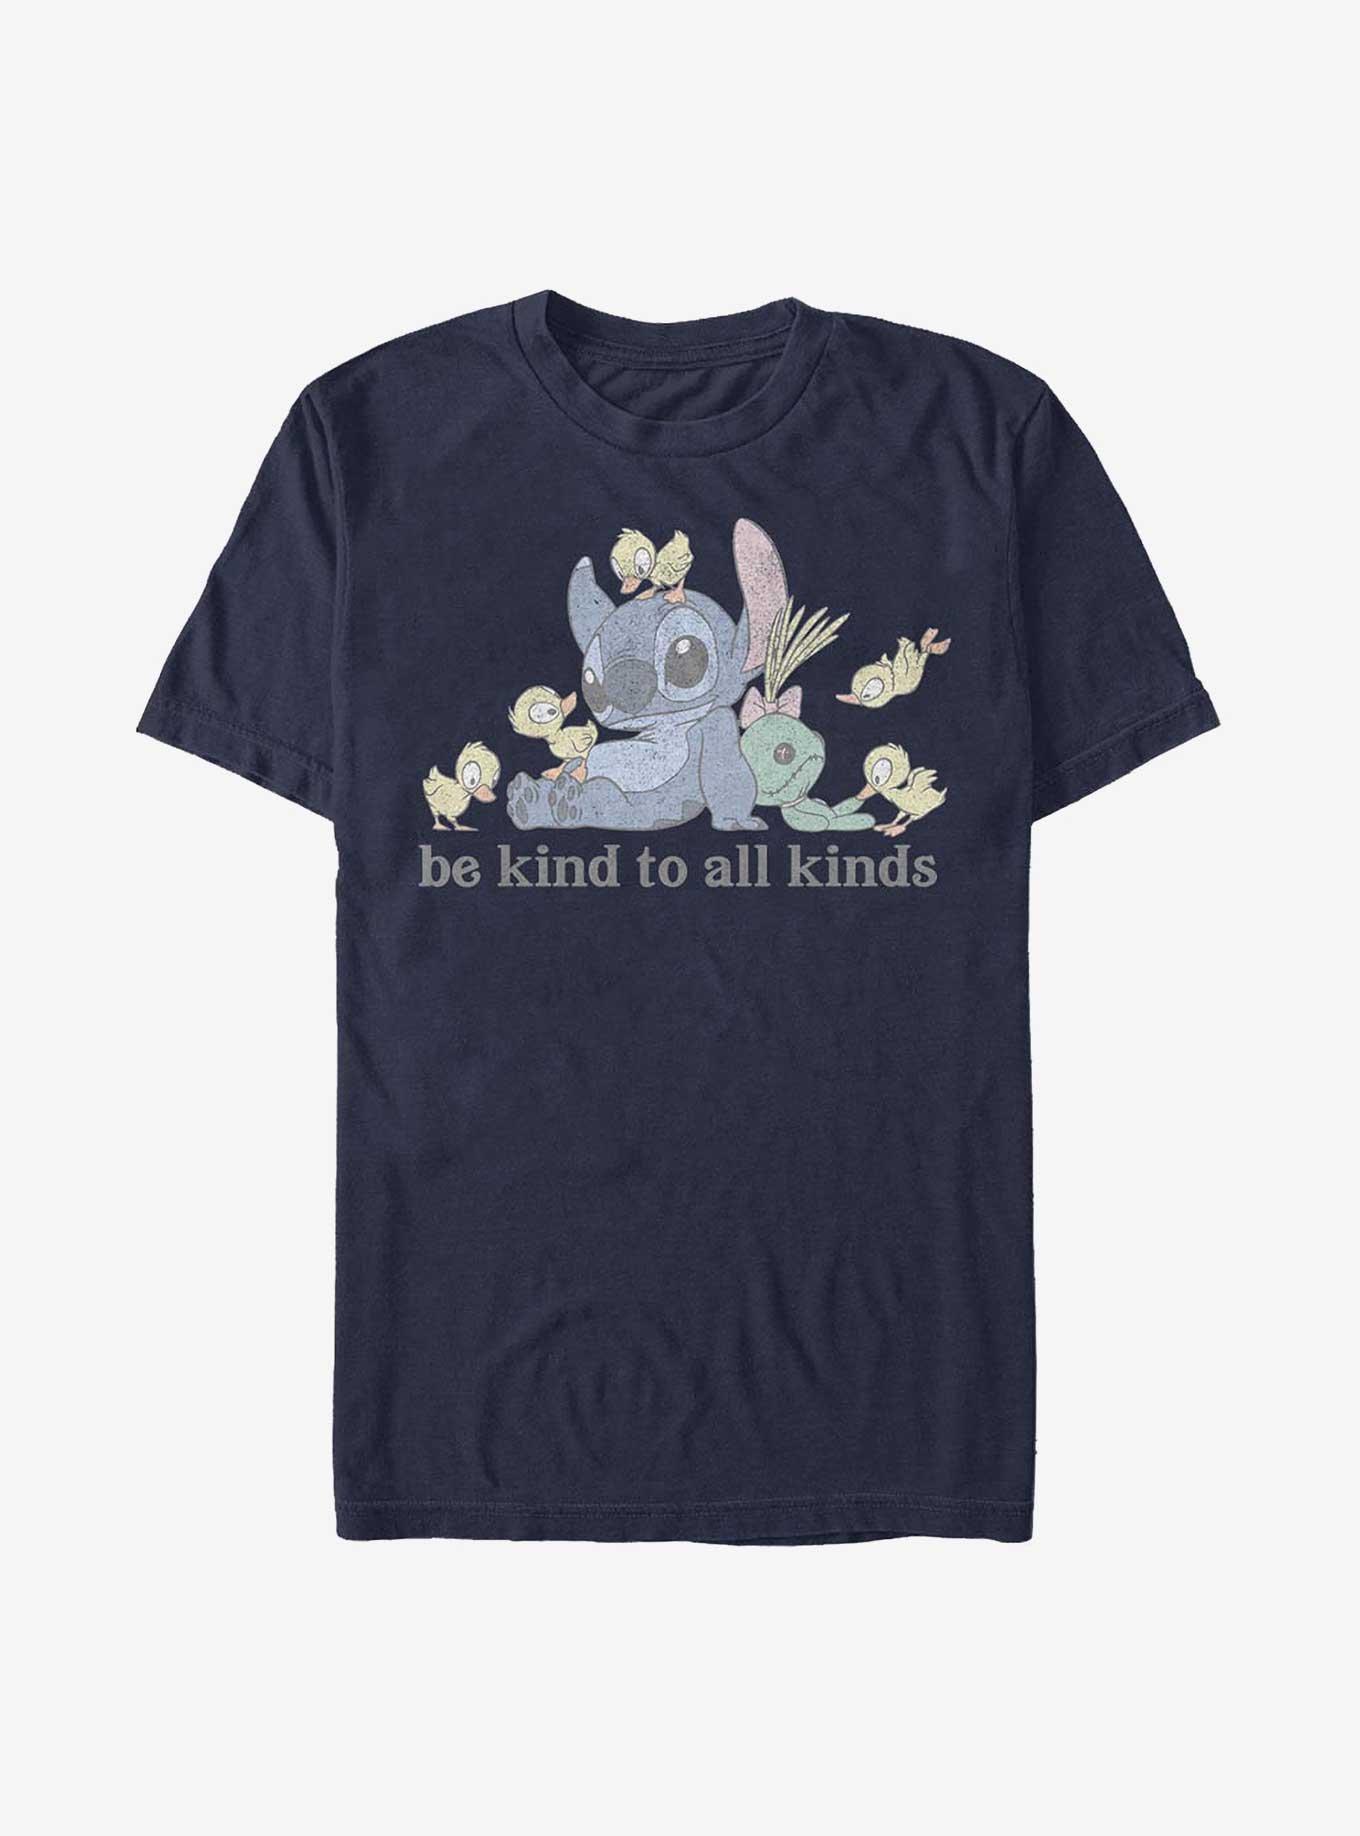 Disney Lilo & Stitch Be Kind To All Kinds T-Shirt, NAVY, hi-res